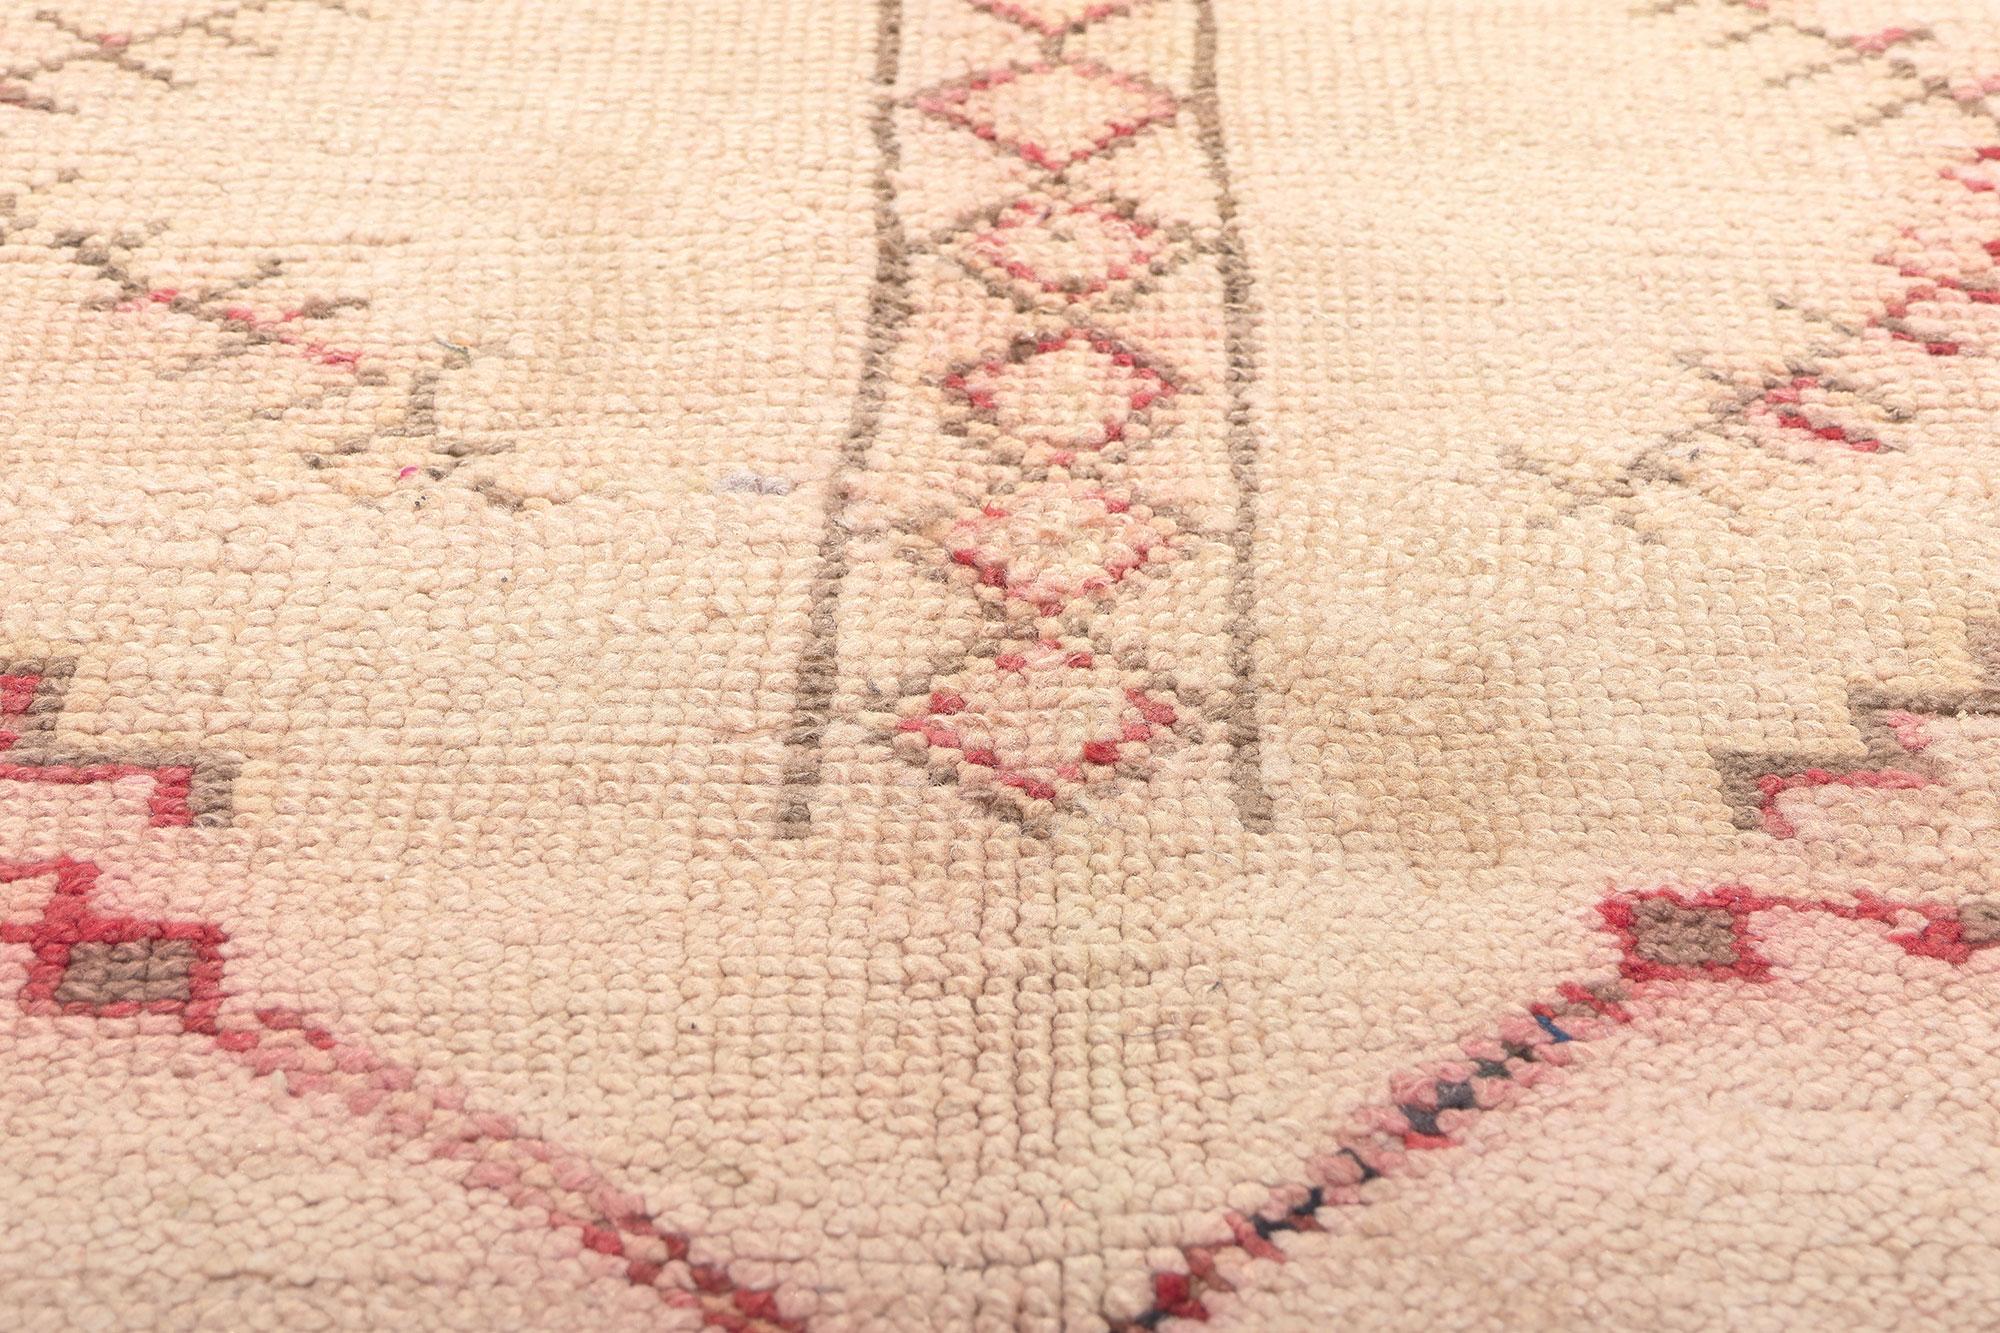 Vintage Neutral Moroccan Rug, Nomadic Charm Meets Global Chic In Good Condition For Sale In Dallas, TX